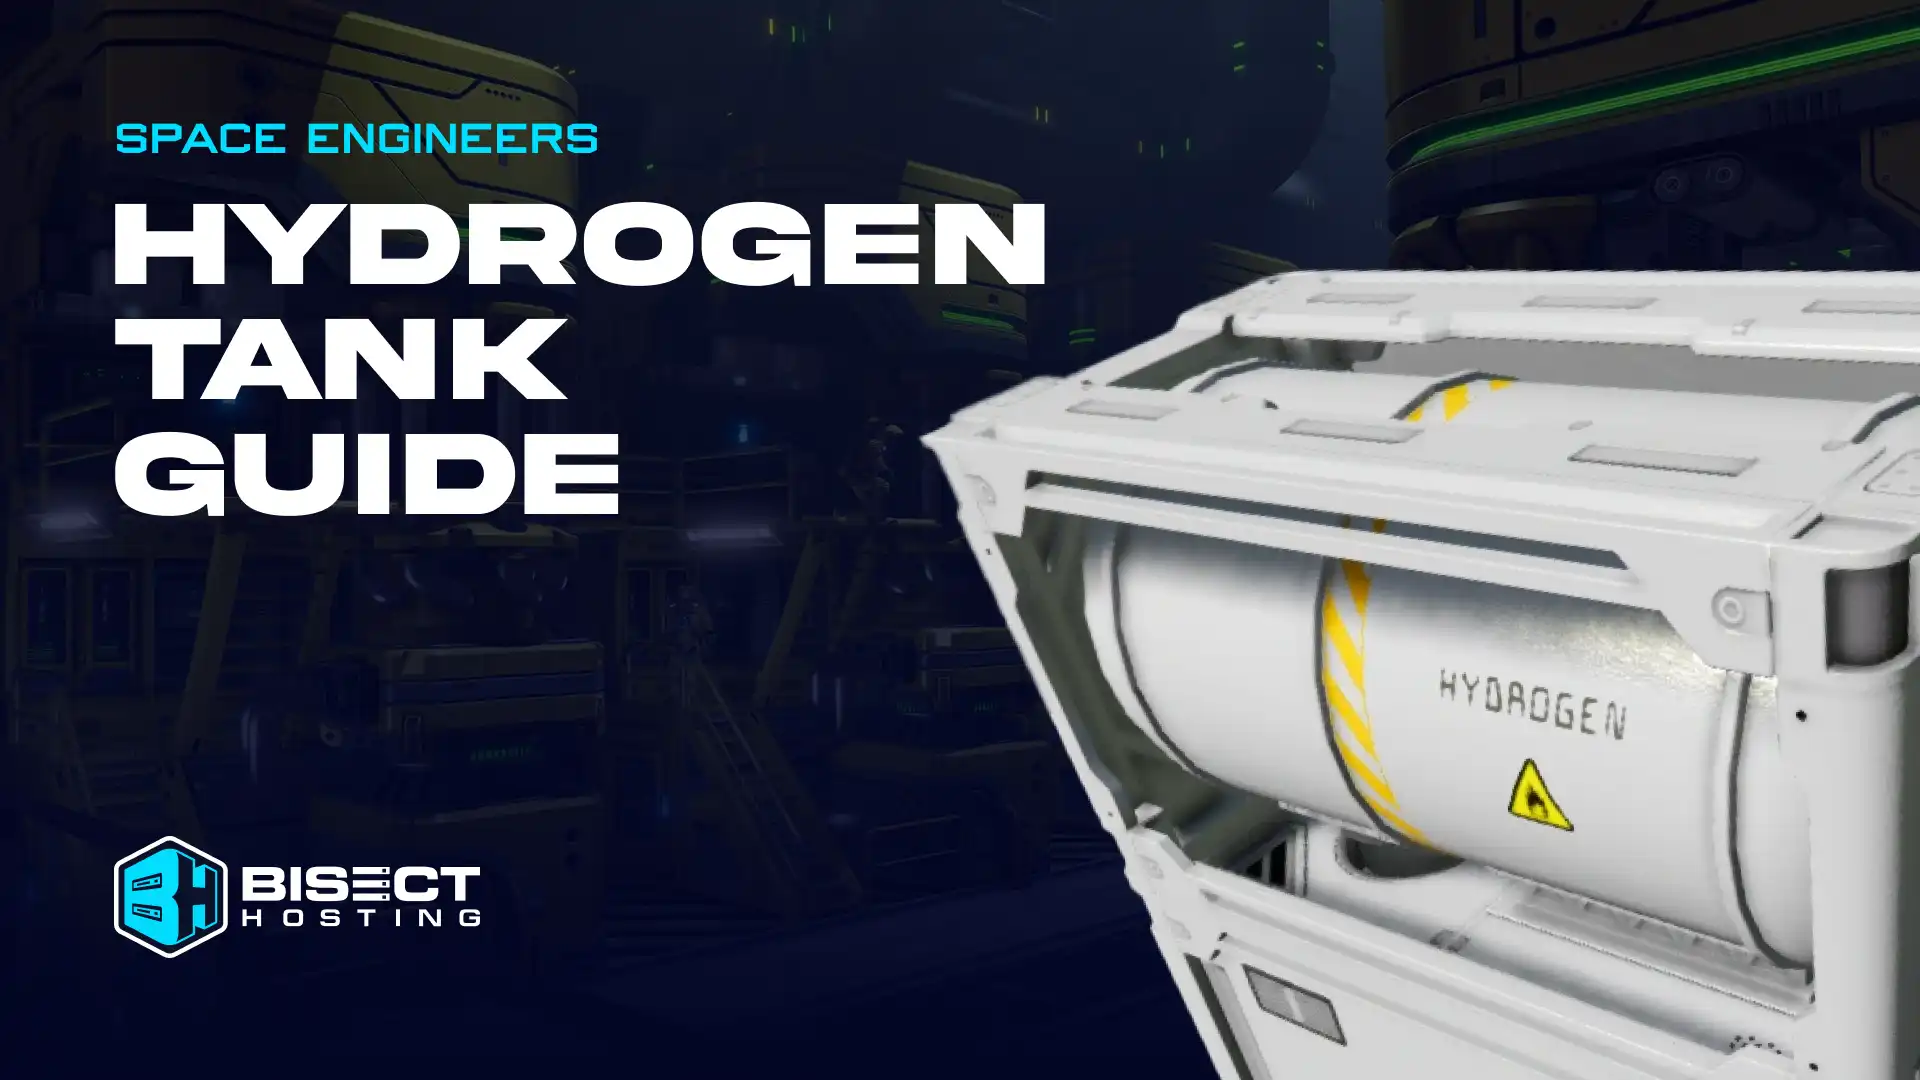 Space Engineers Hydrogen Tank Guide: Capacity, Stats, How to Use, & More